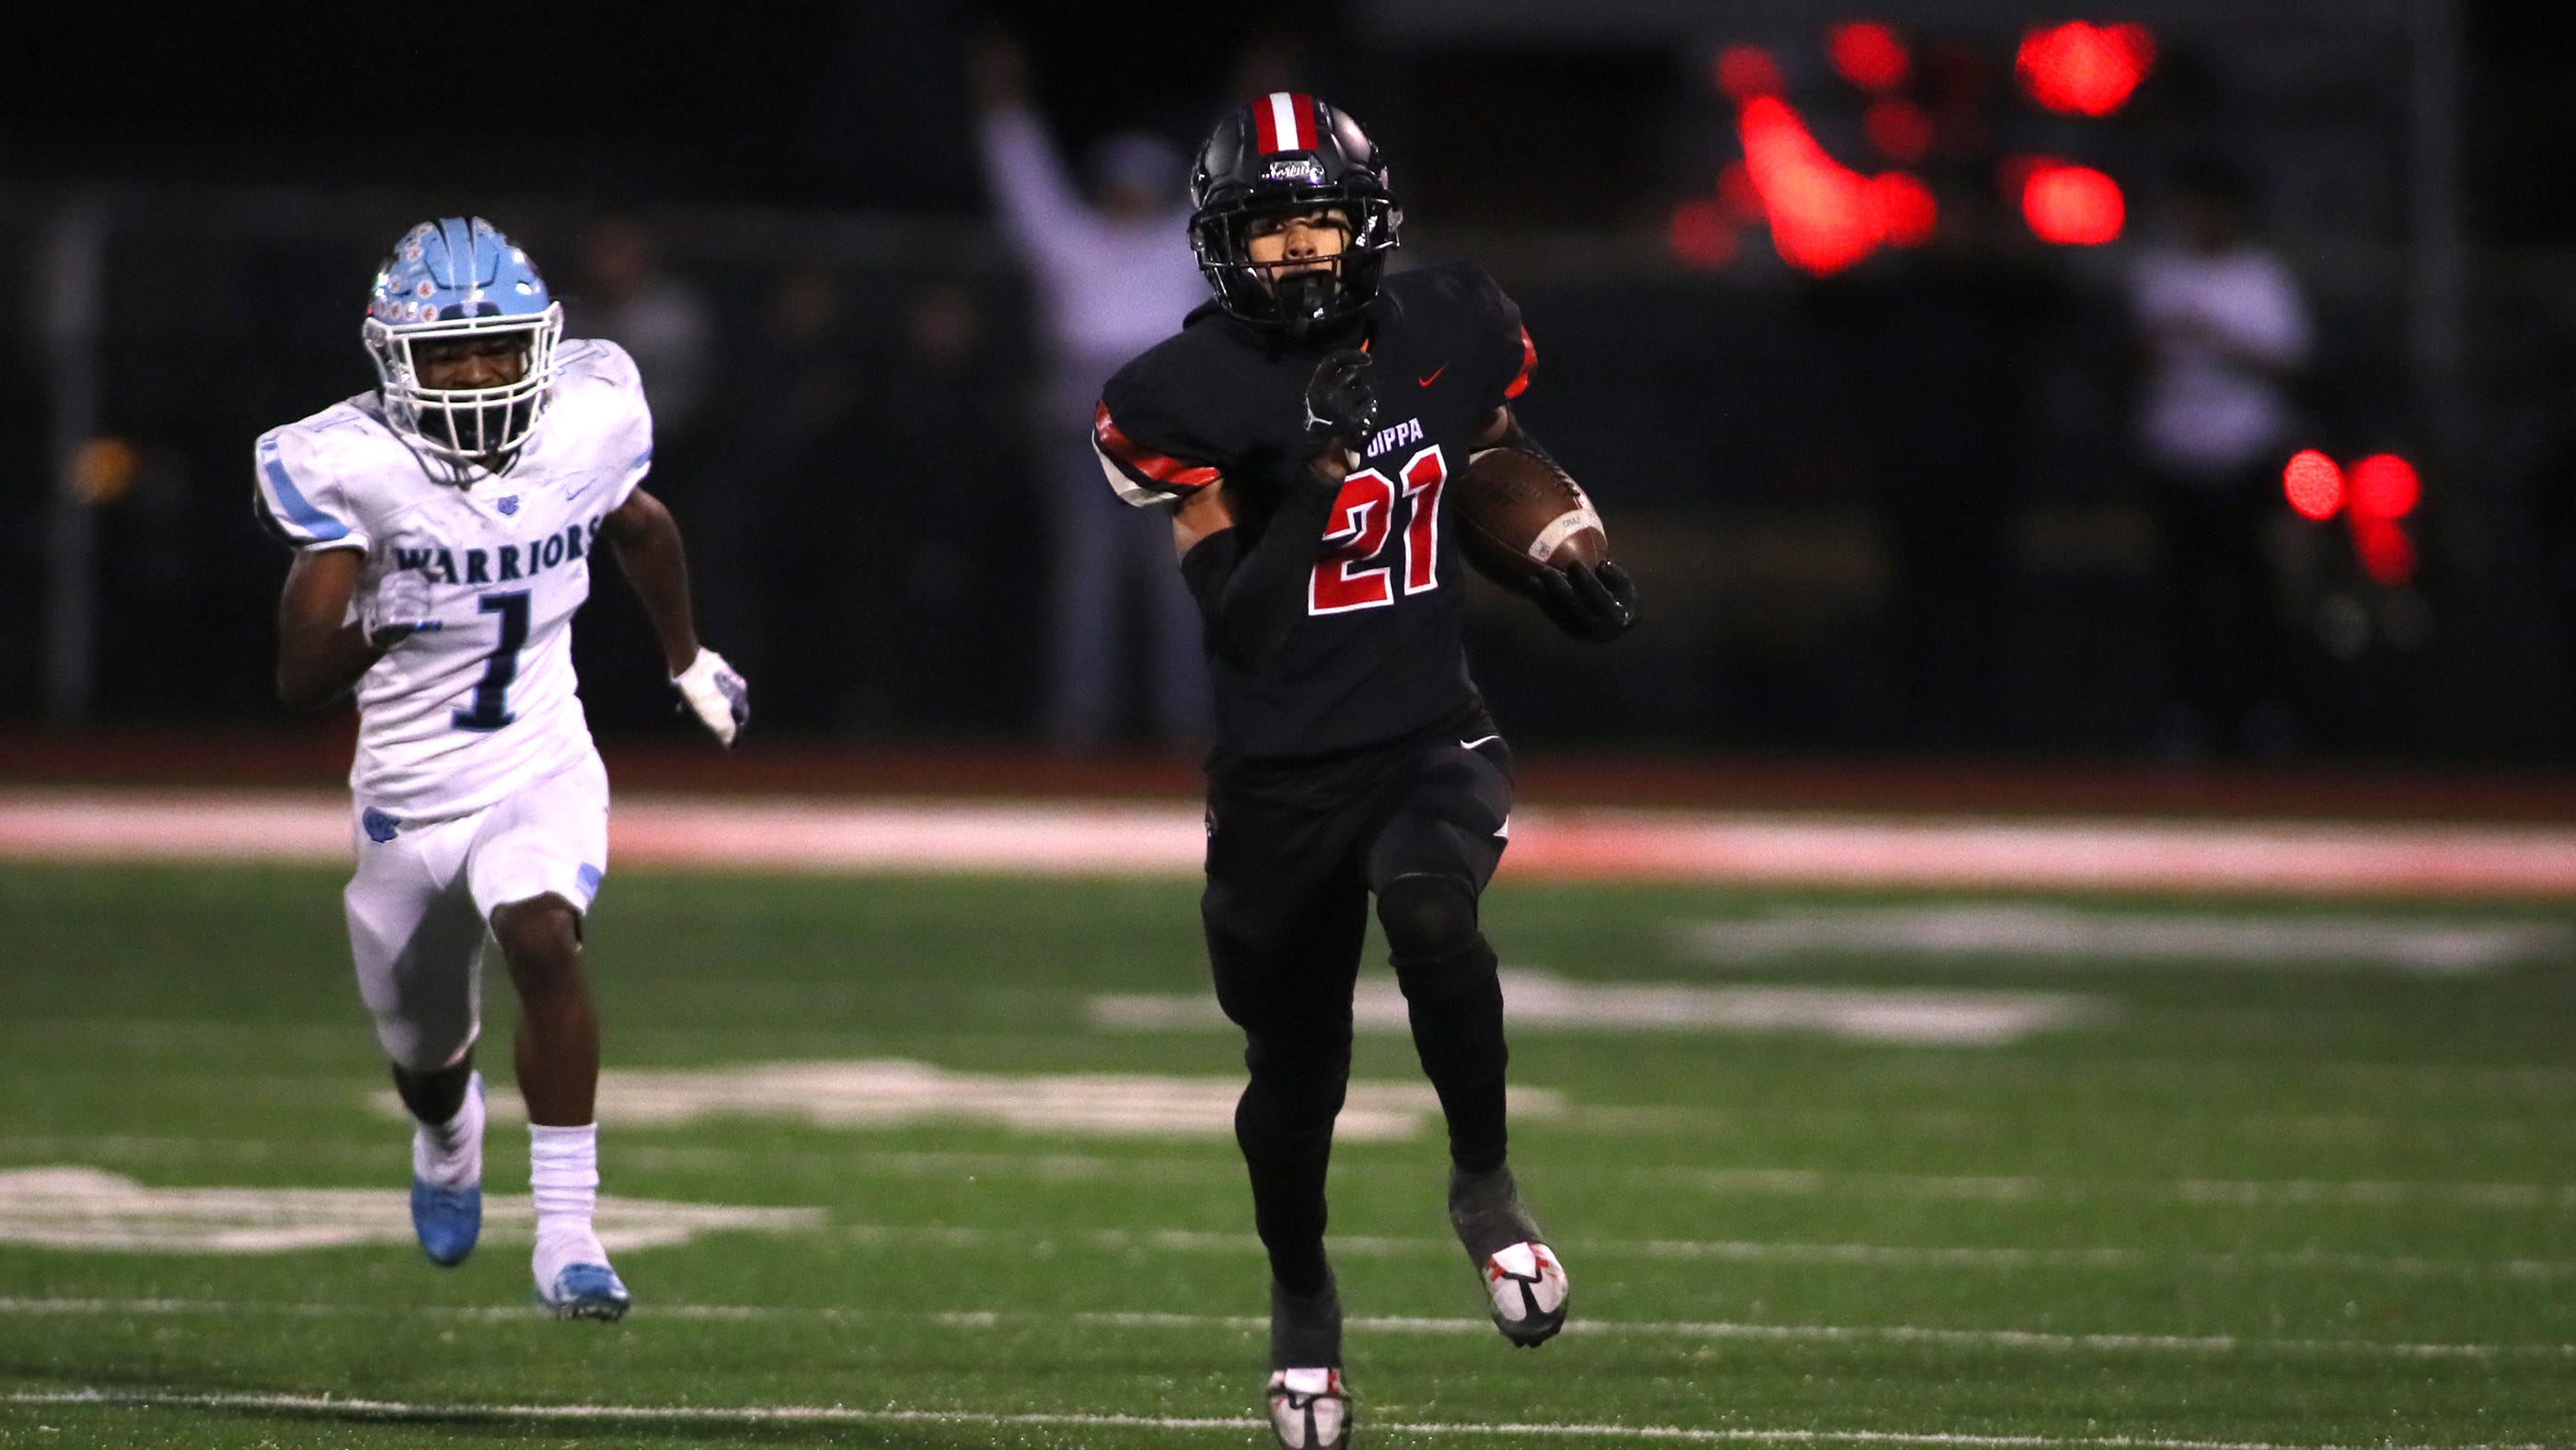 Aliquippa claims conference title, snaps Central Valley winning streak